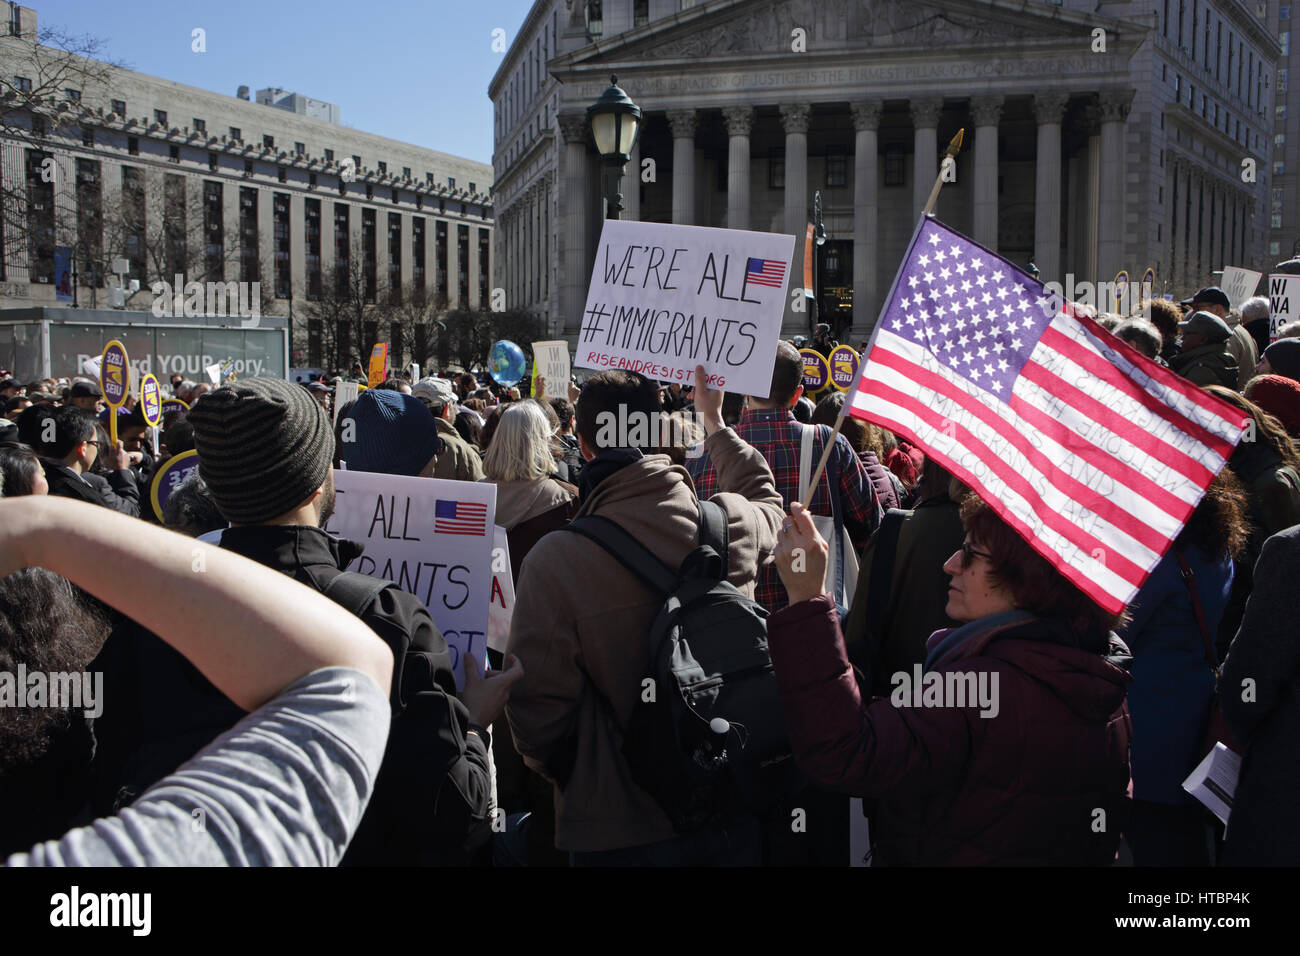 New York, NY, USA - March 9, 2017: A group of about 100 people rally in Foley Square, outside a courthouse in Manhattan, to protest Trump travel ban Stock Photo